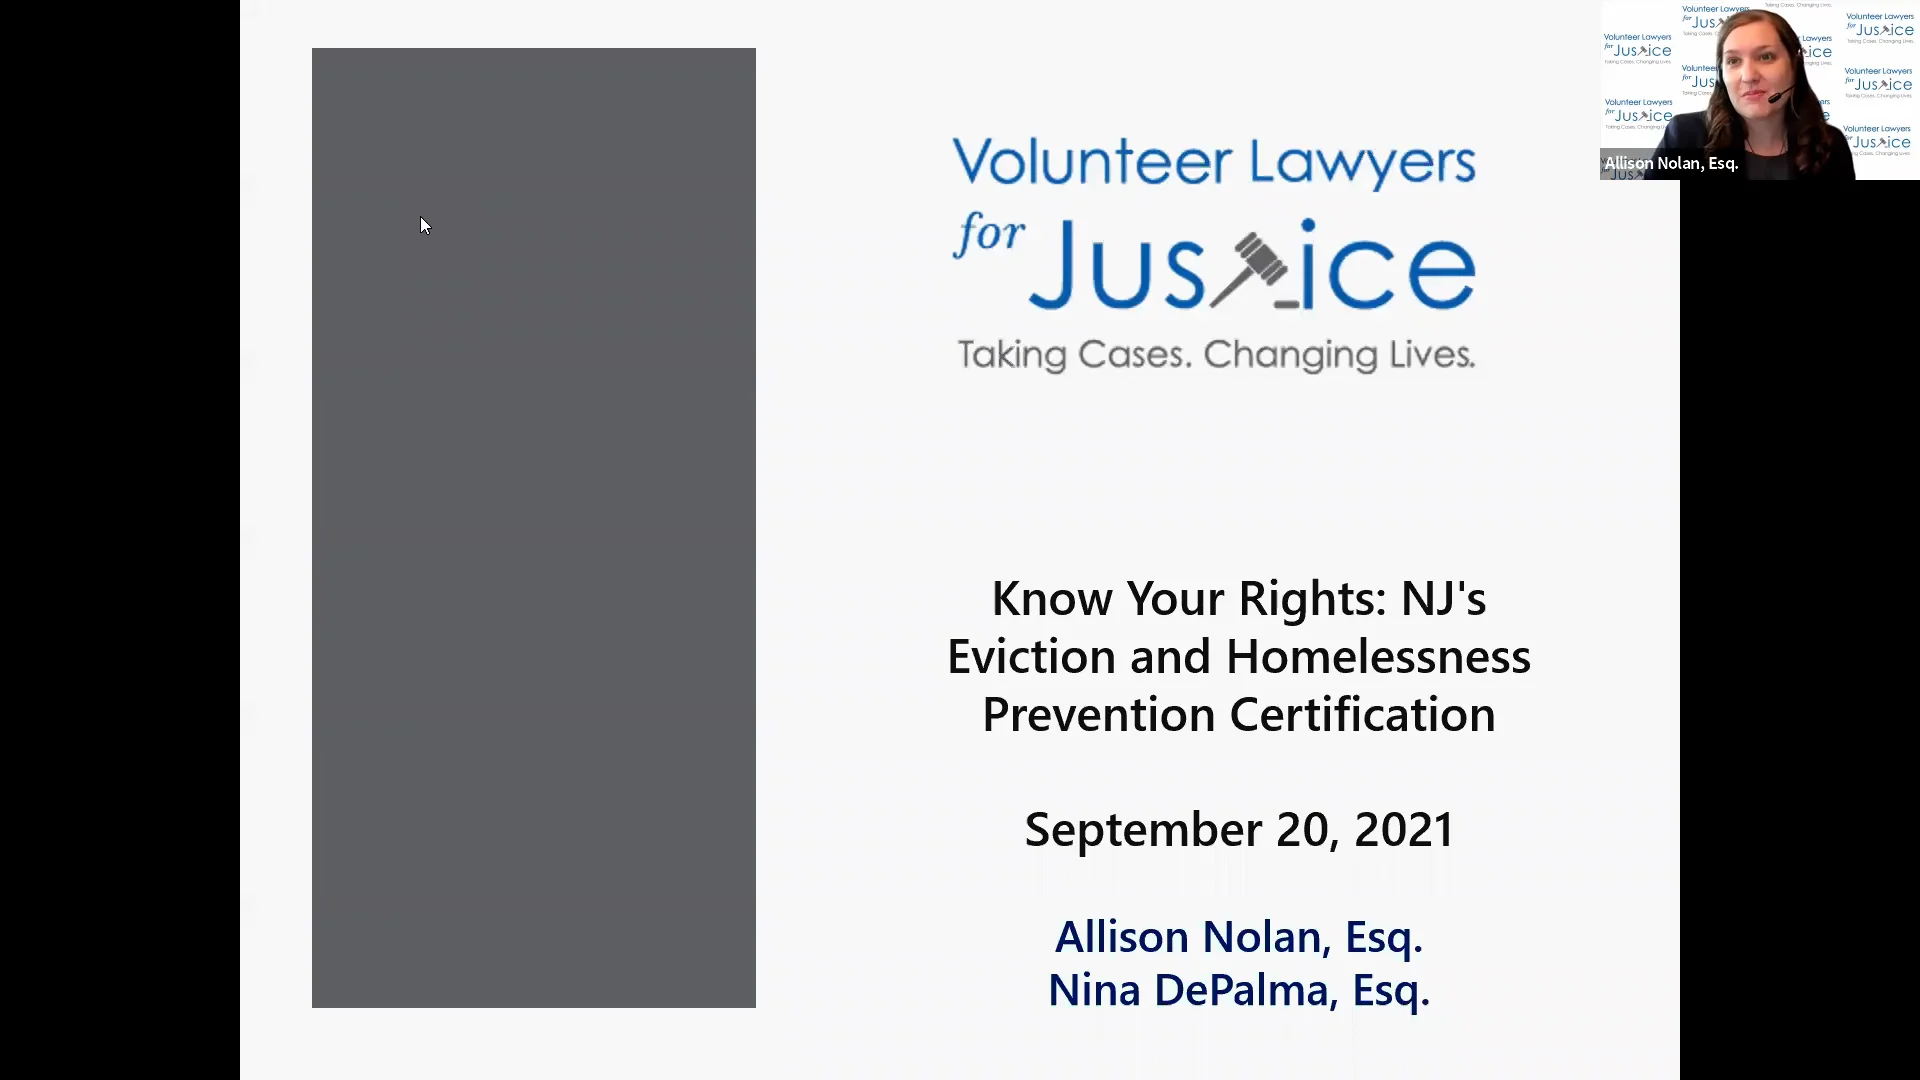 (Sept. 2021) NJ's Eviction and Homelessness Prevention Certification on